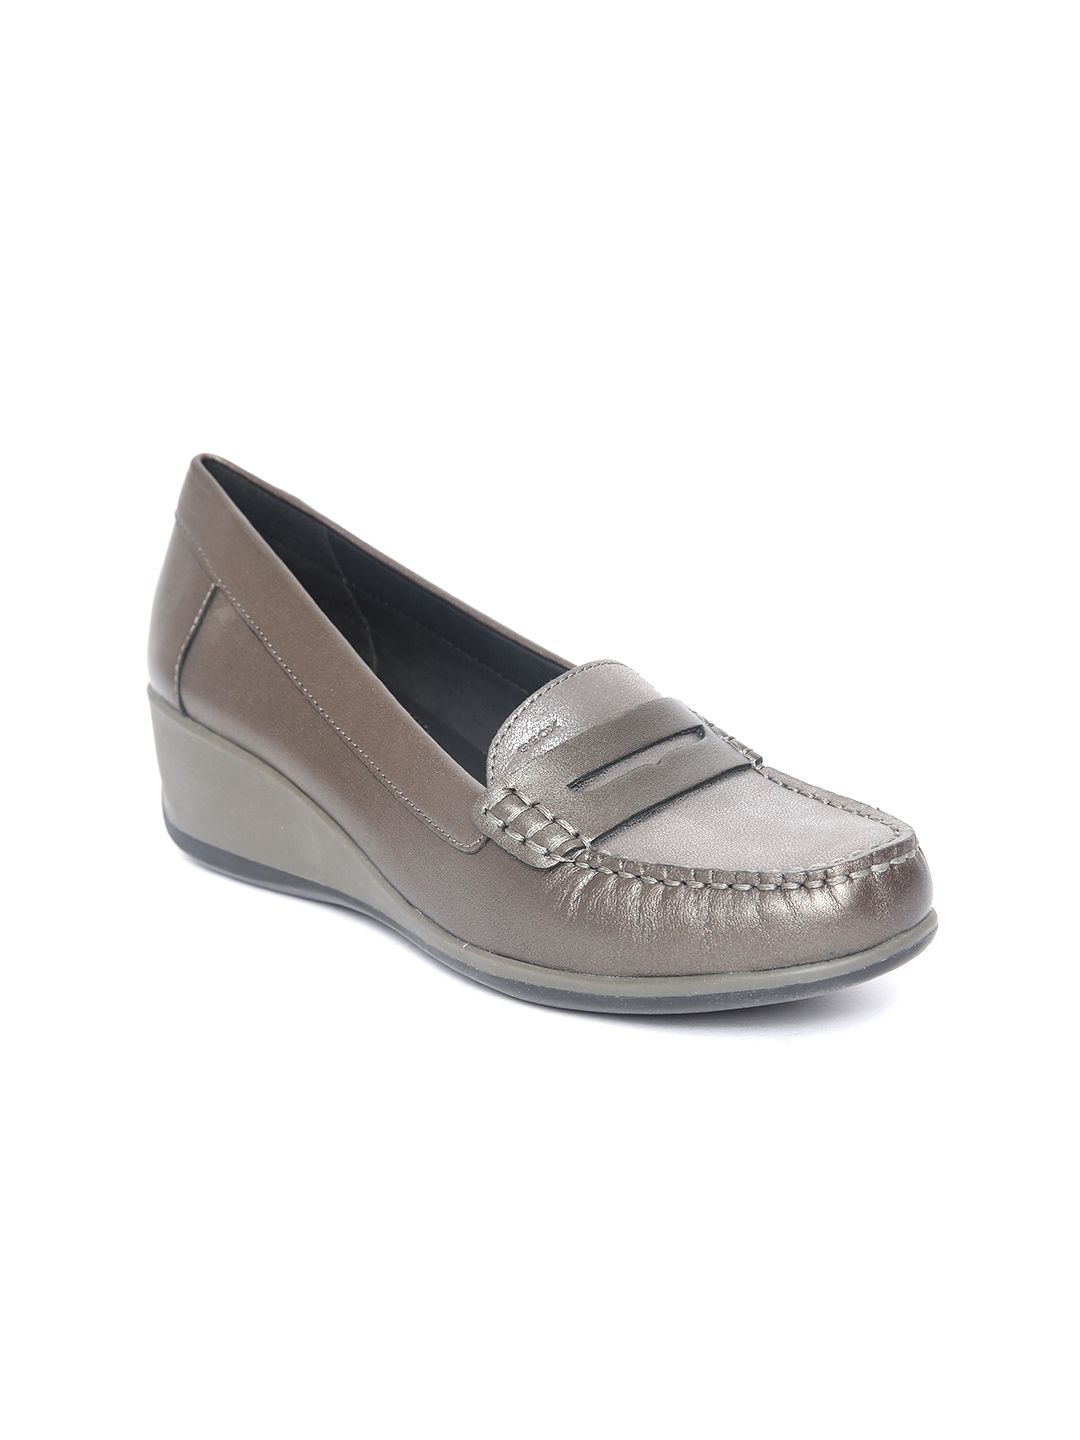 Geox Women Gunmetal-Toned Solid Leather Heeled Loafers Price in India